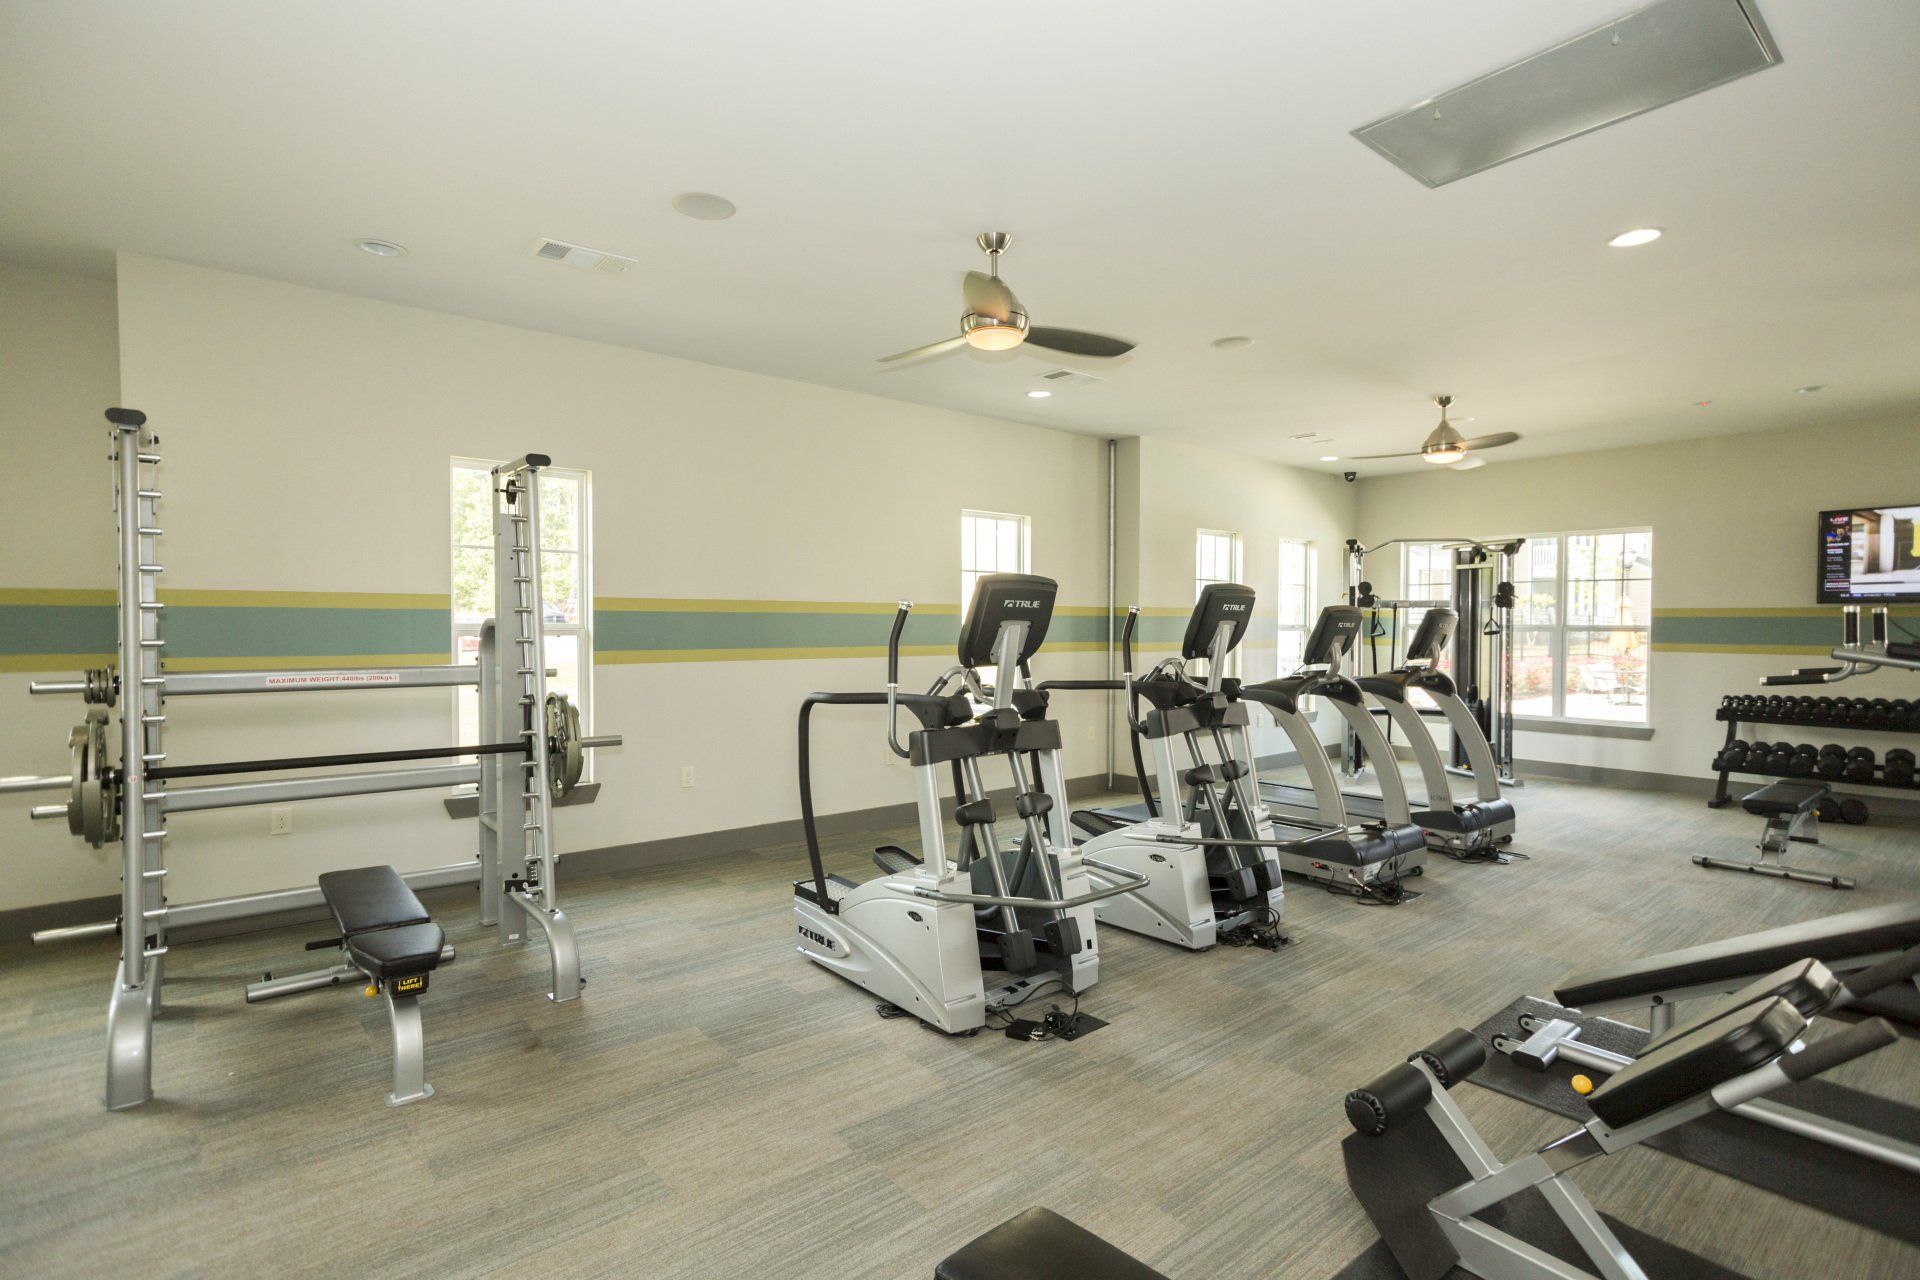 A gym with treadmills and exercise bikes at Thomaston Crossing.